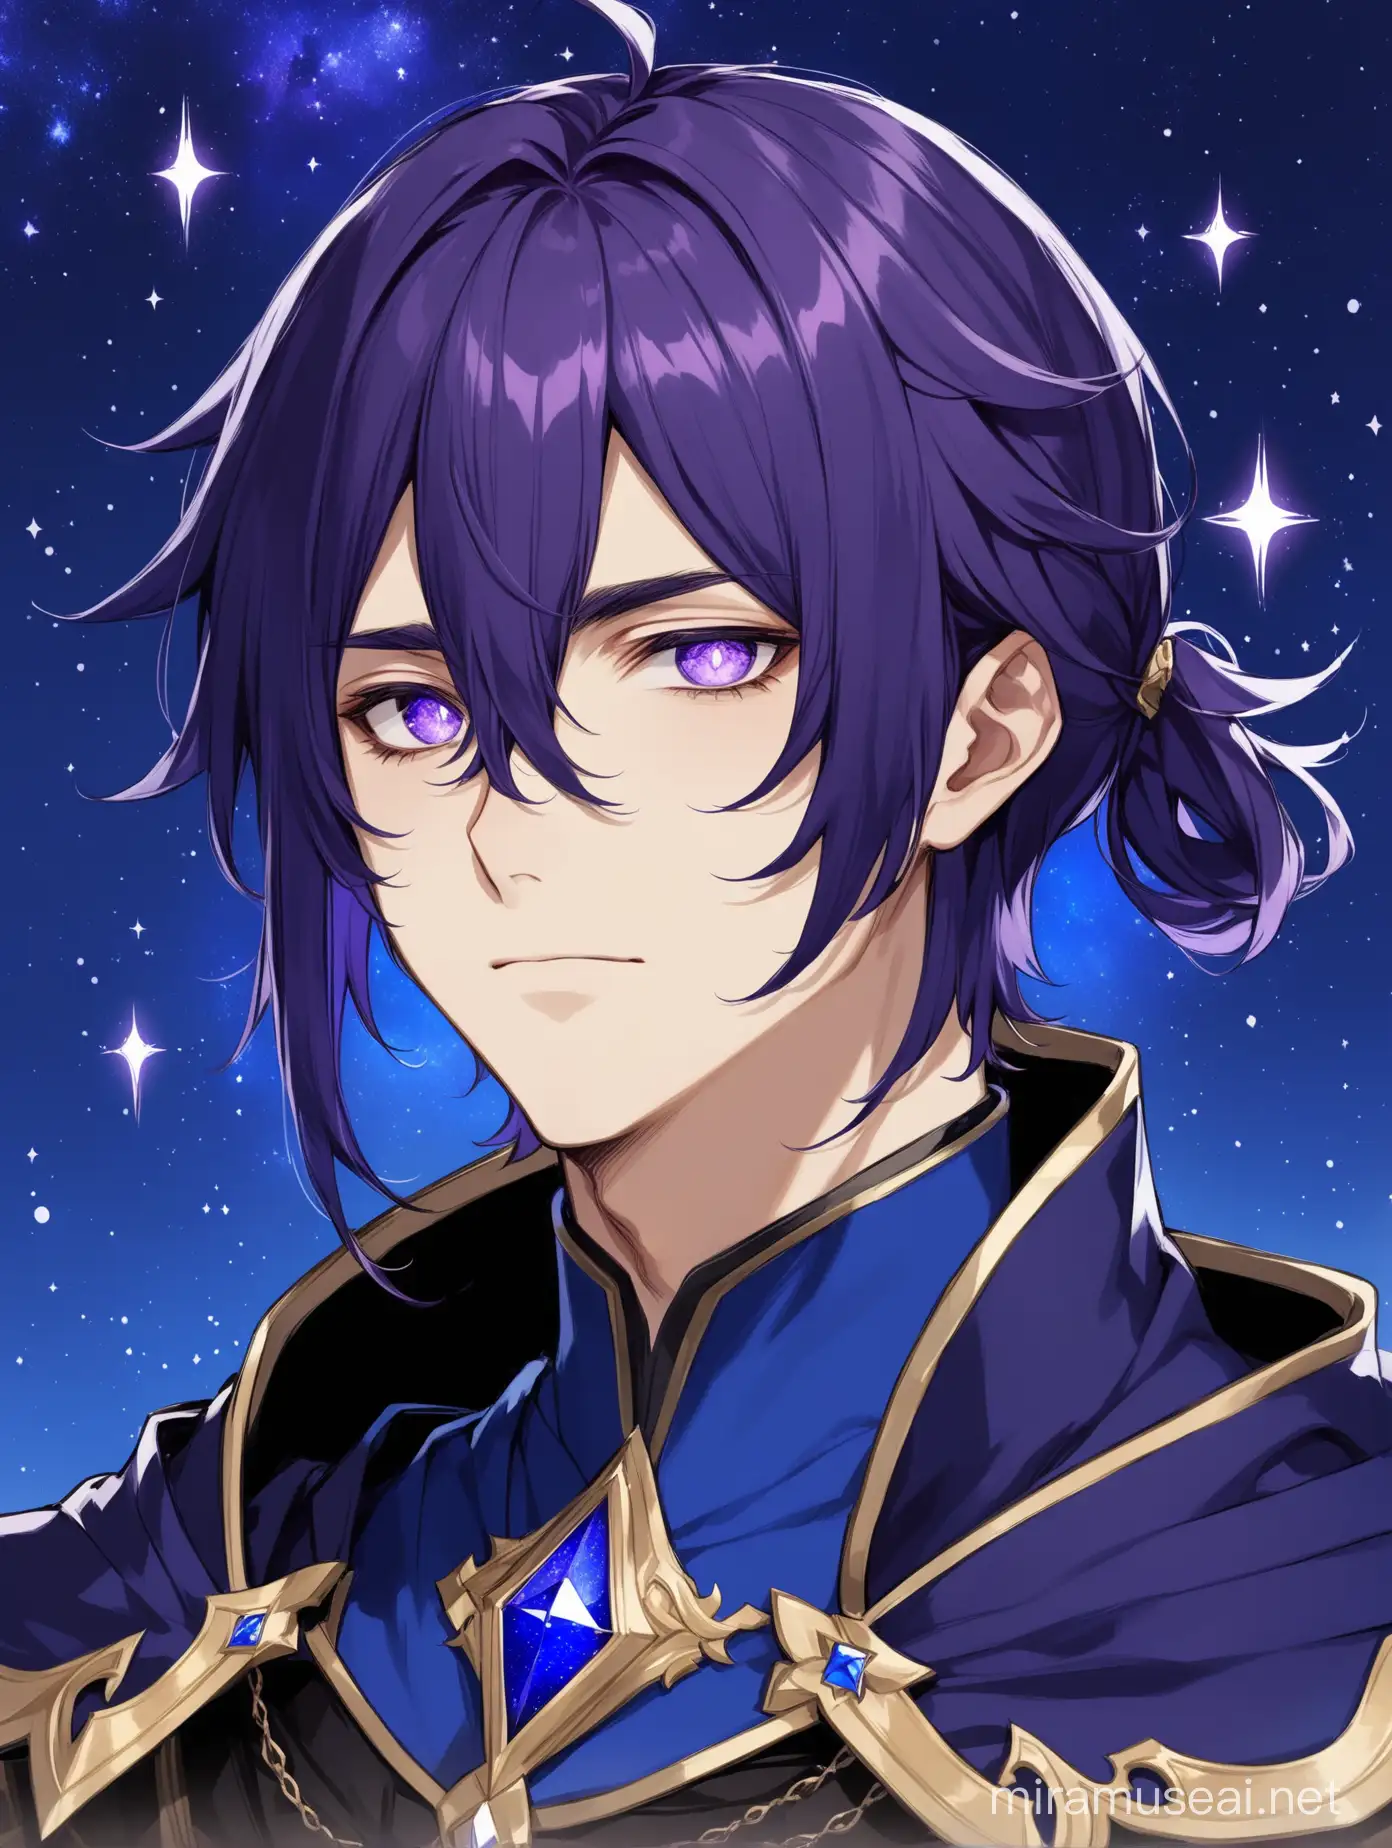 Make a 25-year-old man with long MAROON stringy hair tied into two high ponytails that jut upward and outward.He is pale with purple eyes with diamond pupils. He has purple eyebags under his eyes. He is wearing an outfit like Dainsleif from genshin impact, but his outfit is midnight blue, very dark purple and black and gold. He has an outfit aesthetic like Dainsleif from Genshin impact. His eyes have diamond pupils. He has a mask covering the side of his right face - This mask is dark purple and cracked like Dainsleif from Genshin Impact. IT ONLY COVERS ONE SIDE OF HIS FACE. He has a dark purple galaxy cape that has stars on it like the milkyway. He has purple eye bags underneath his eyes. He looks unbothered. HE HAS LONG HAIR
